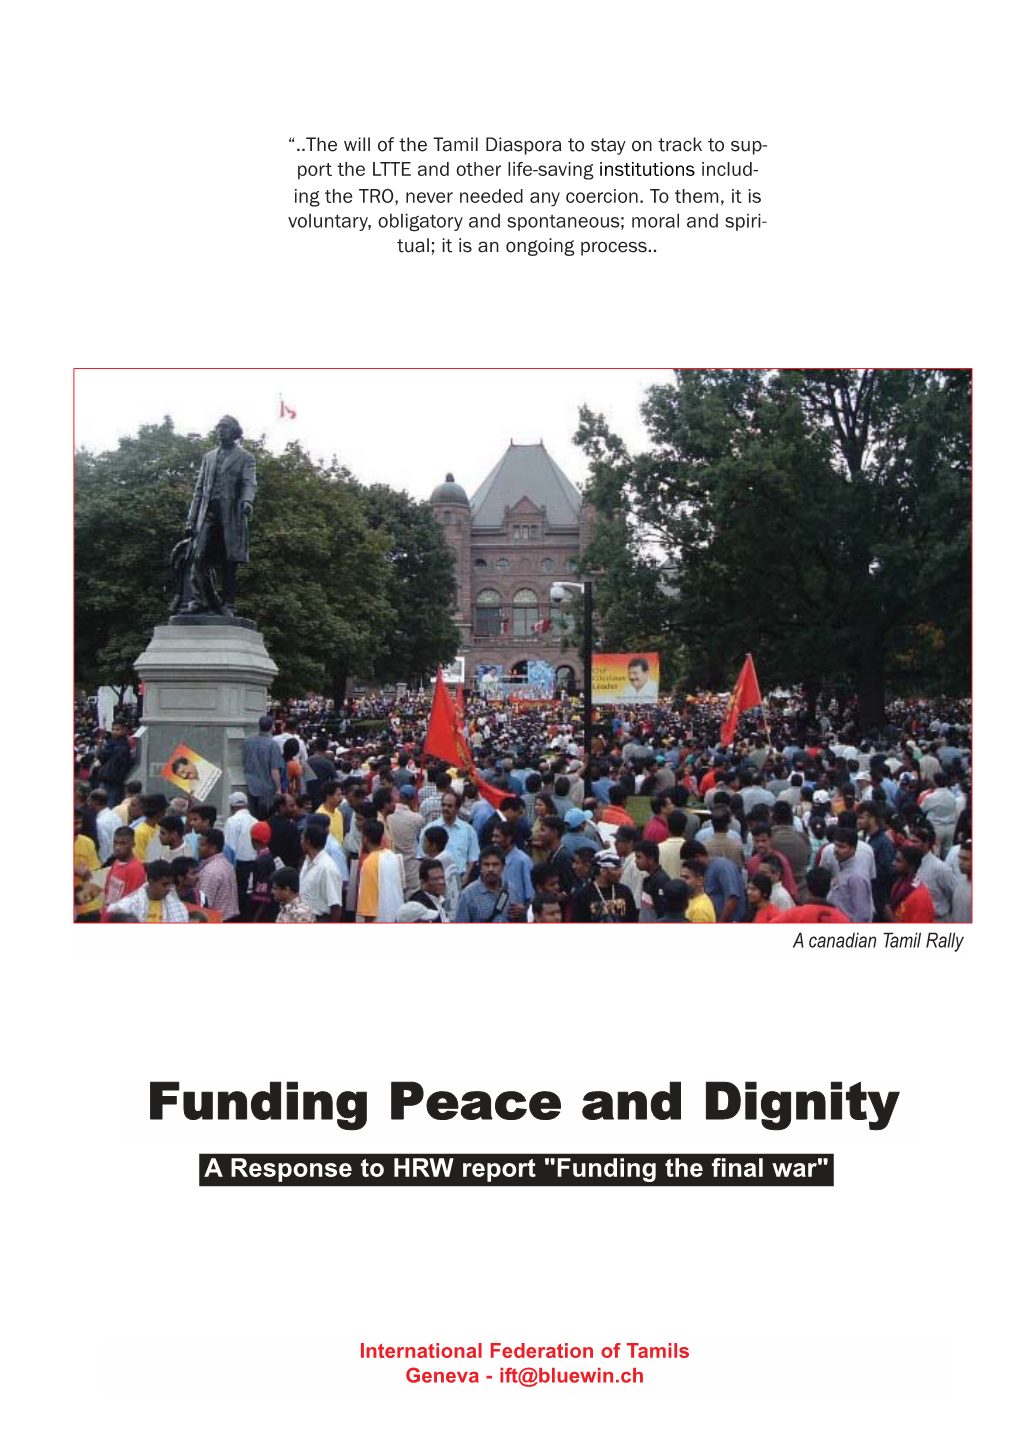 Funding Peace and Dignity a Response to HRW Report "Funding the Final War"